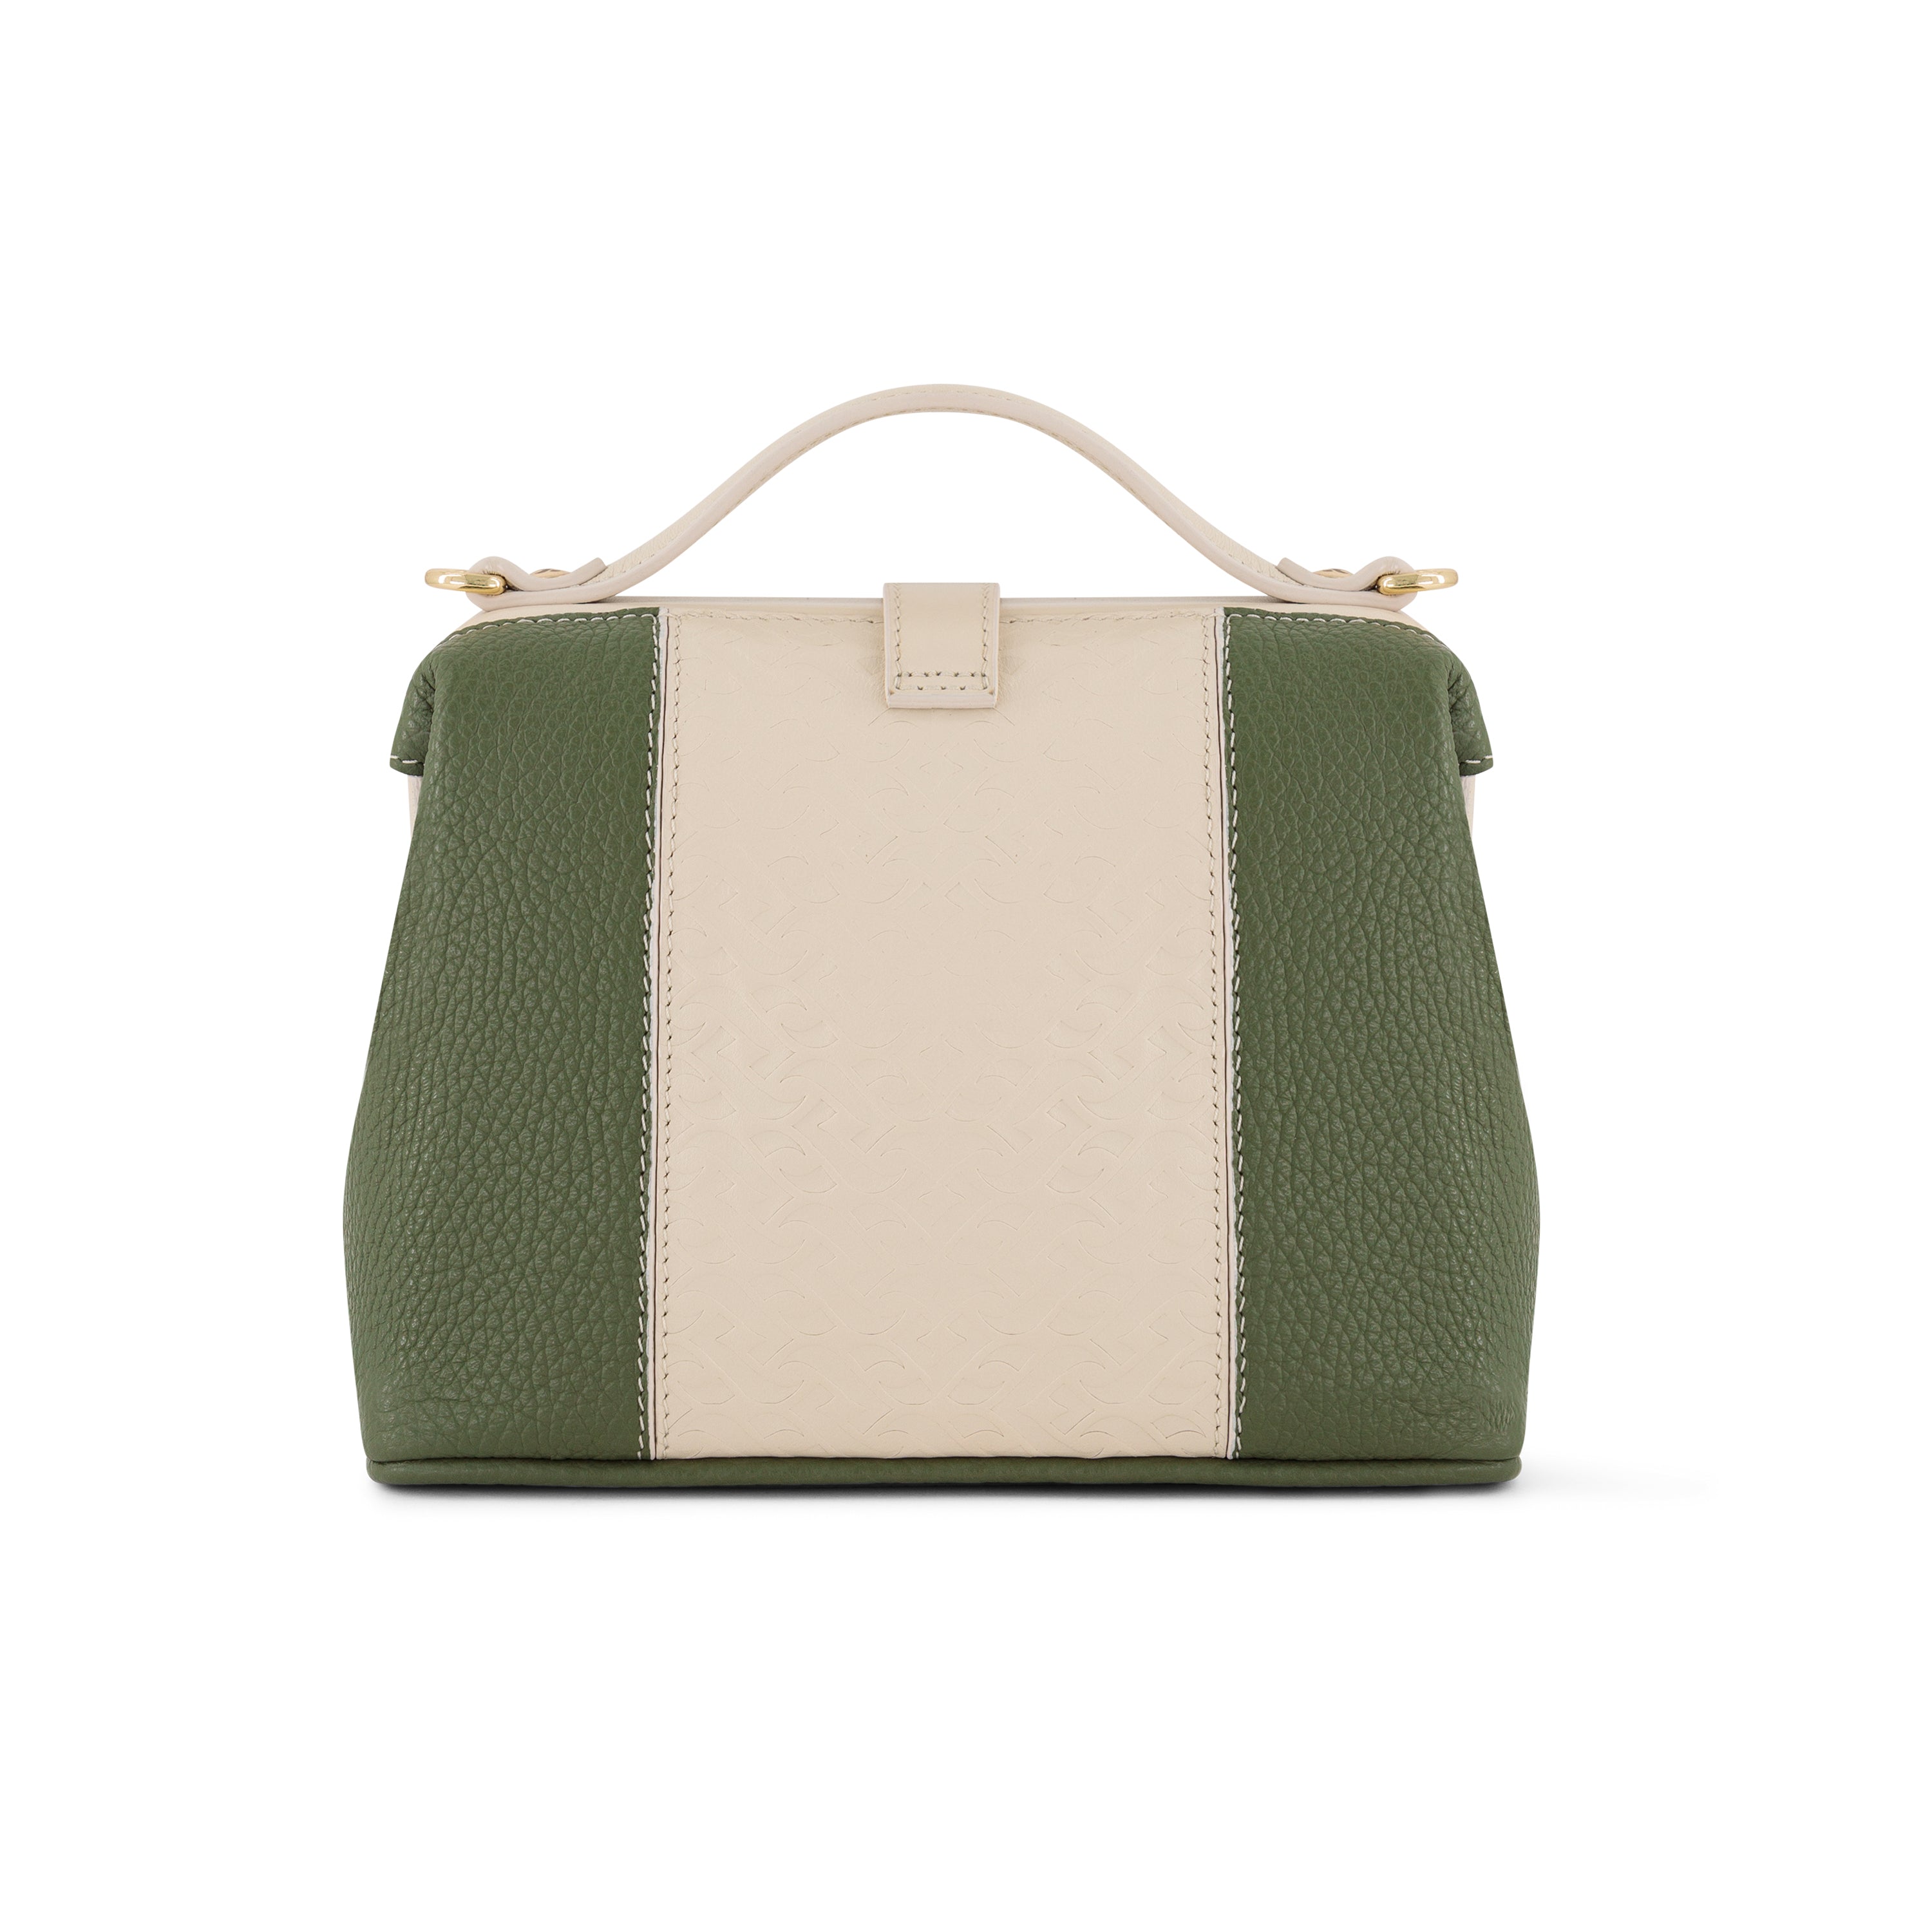 THE SHOULDER HANDMADE BAG CRAFTED FROM GREEN GENUINE LEATHER WITH CLASSY PATTERN